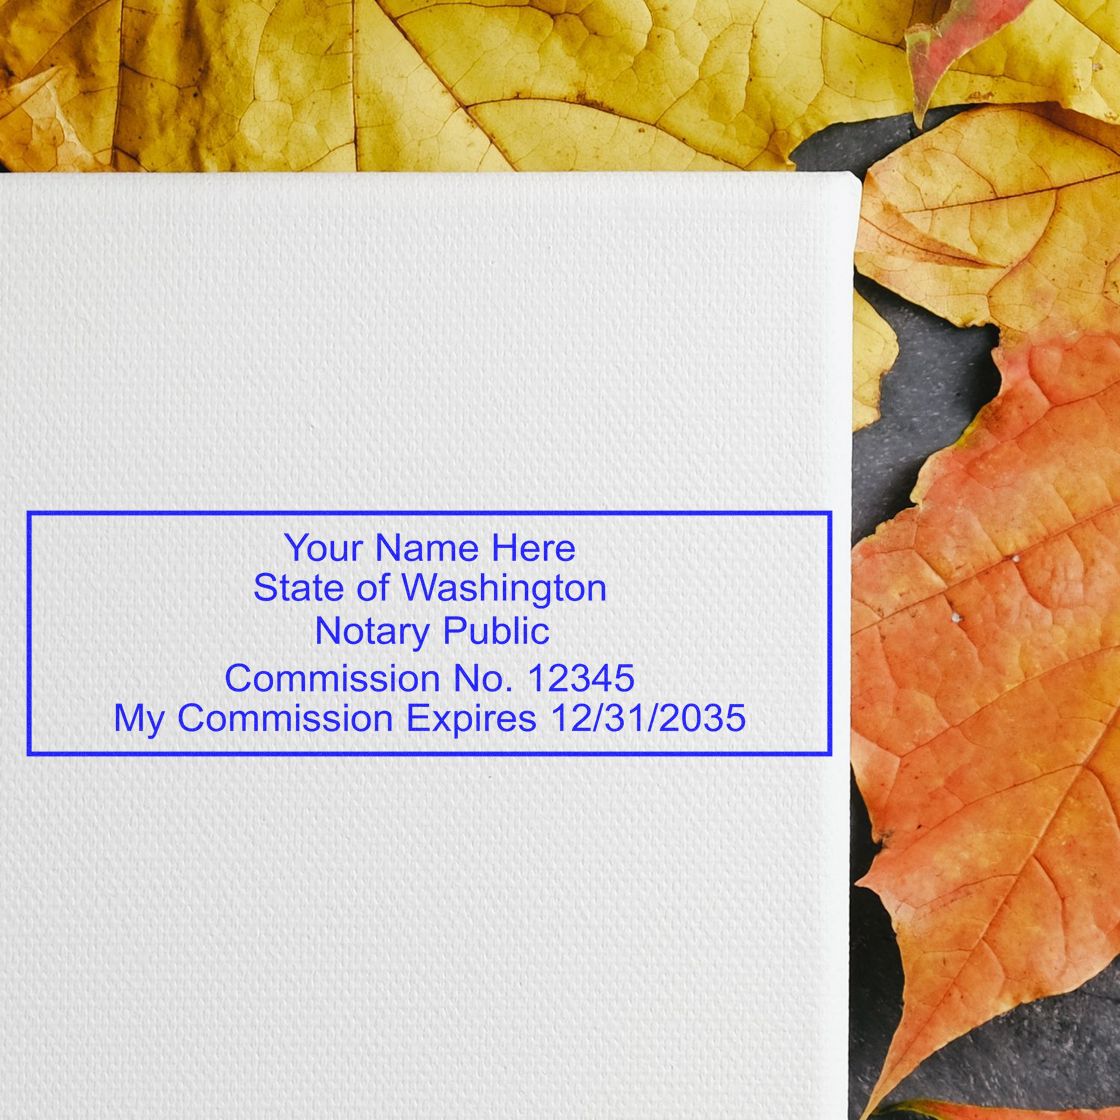 This paper is stamped with a sample imprint of the Wooden Handle Washington Rectangular Notary Public Stamp, signifying its quality and reliability.